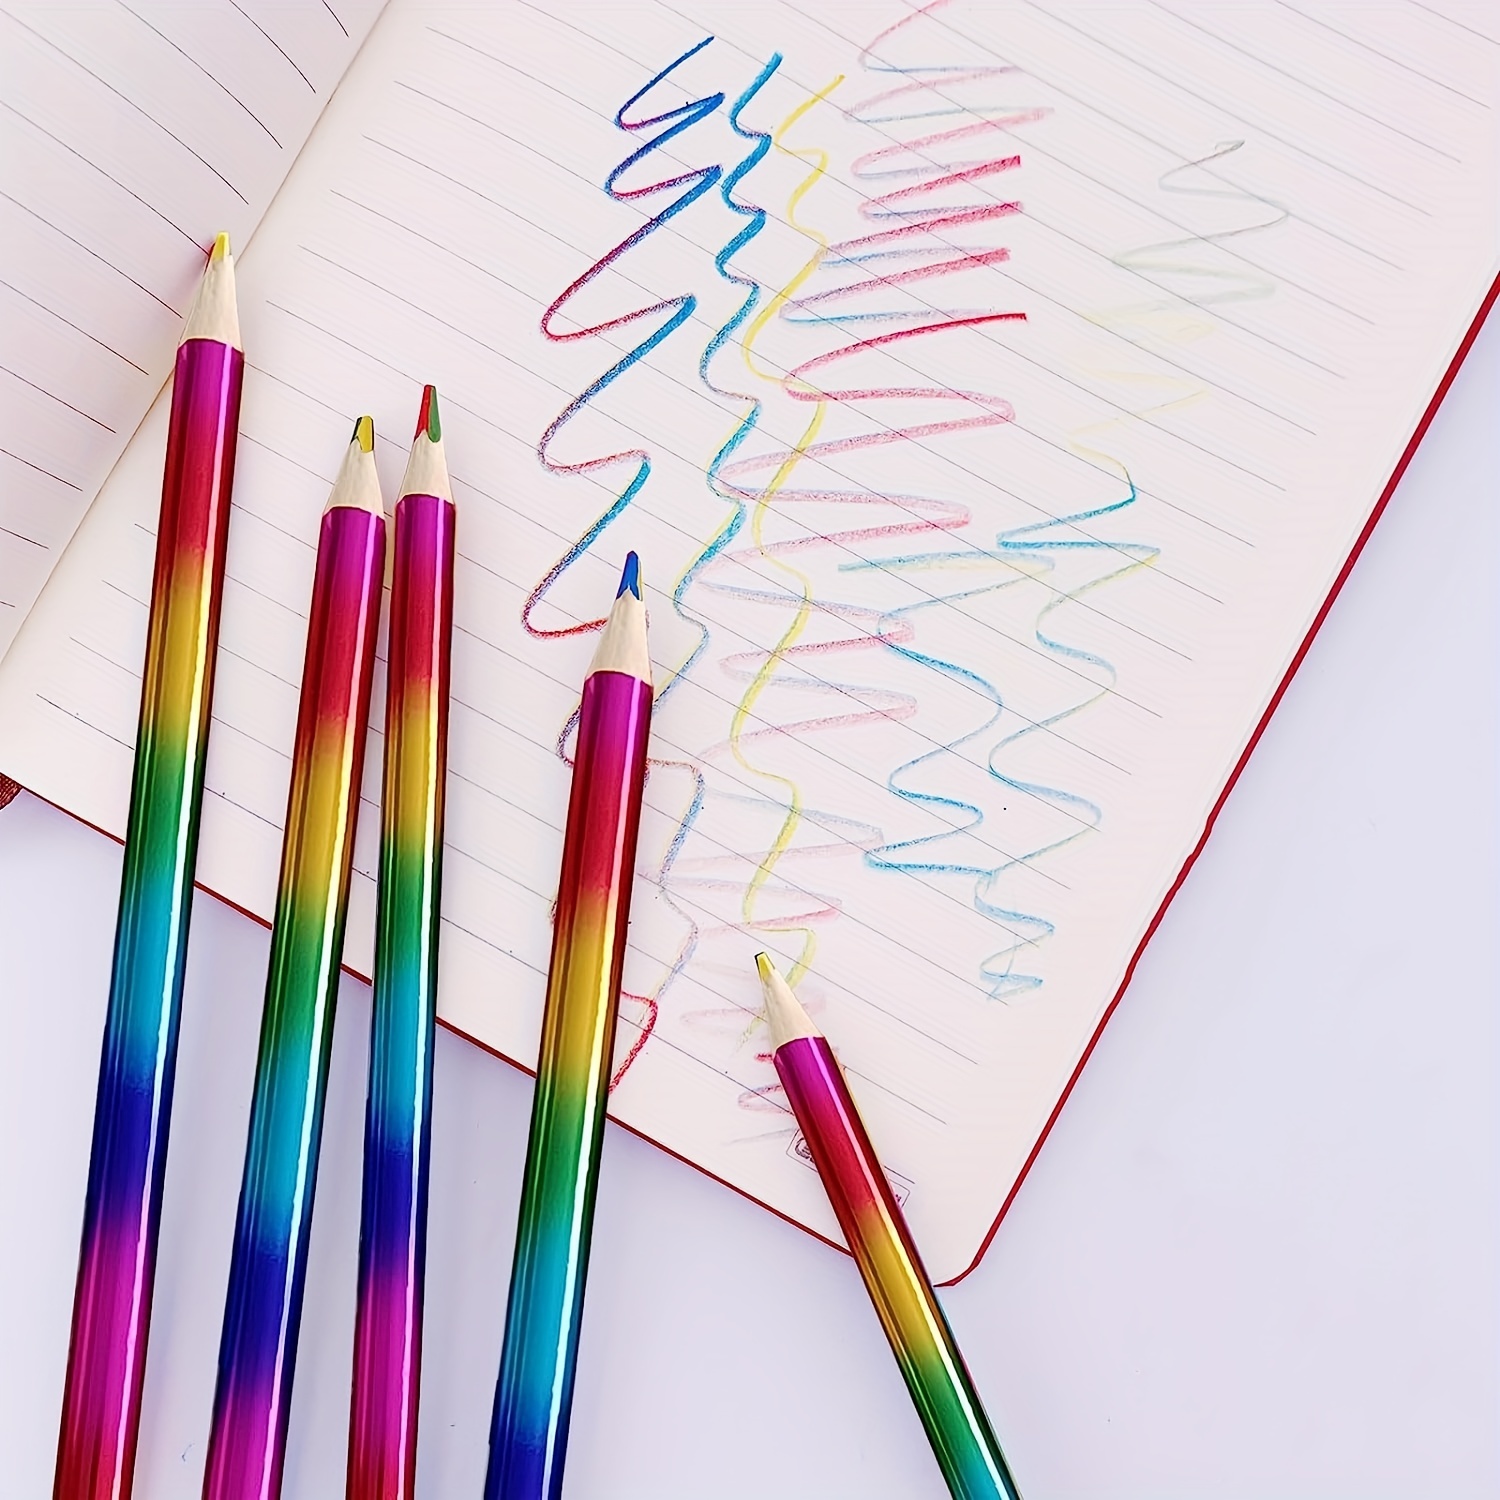  ThEast 12 Rainbow Colored Pencils for Adults and Kids